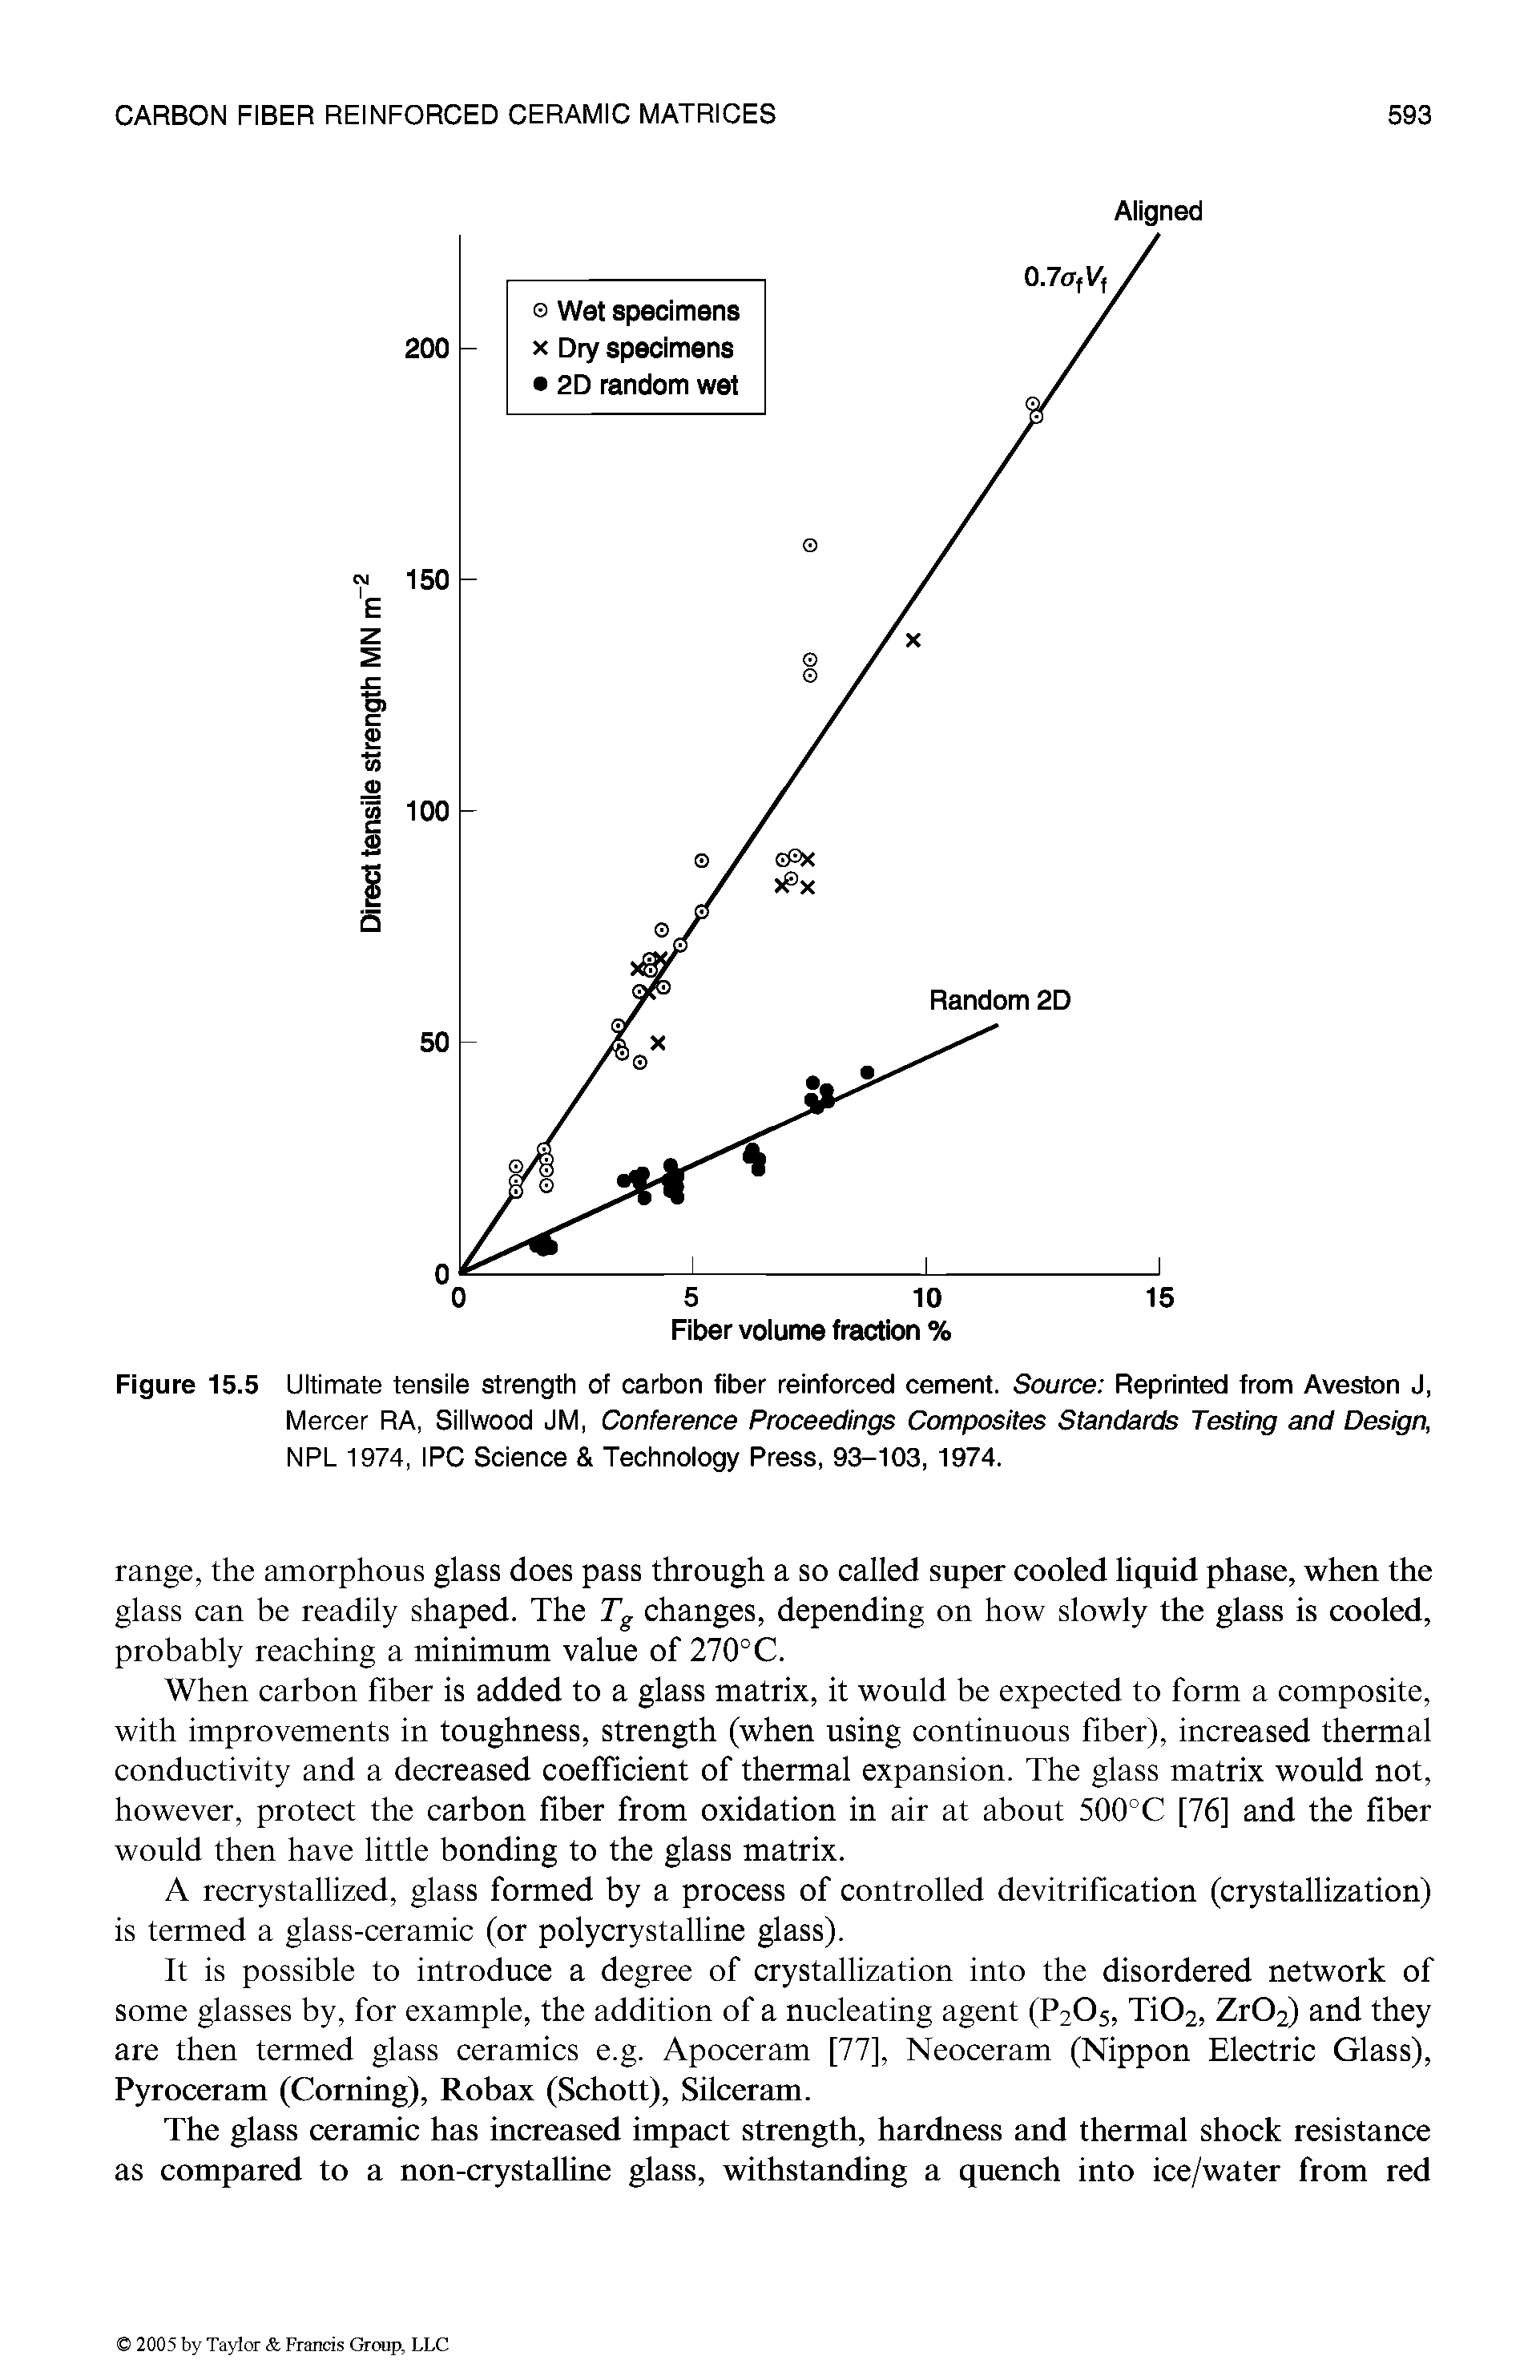 Figure 15.5 Ultimate tensile strength of carbon fiber reinforced cement. Source Reprinted from Aveston J, Mercer RA, Sillwood JM, Conference Proceedings Composites Standards Testing and Design, NPL 1974, IPC Science Technology Press, 93-103, 1974.